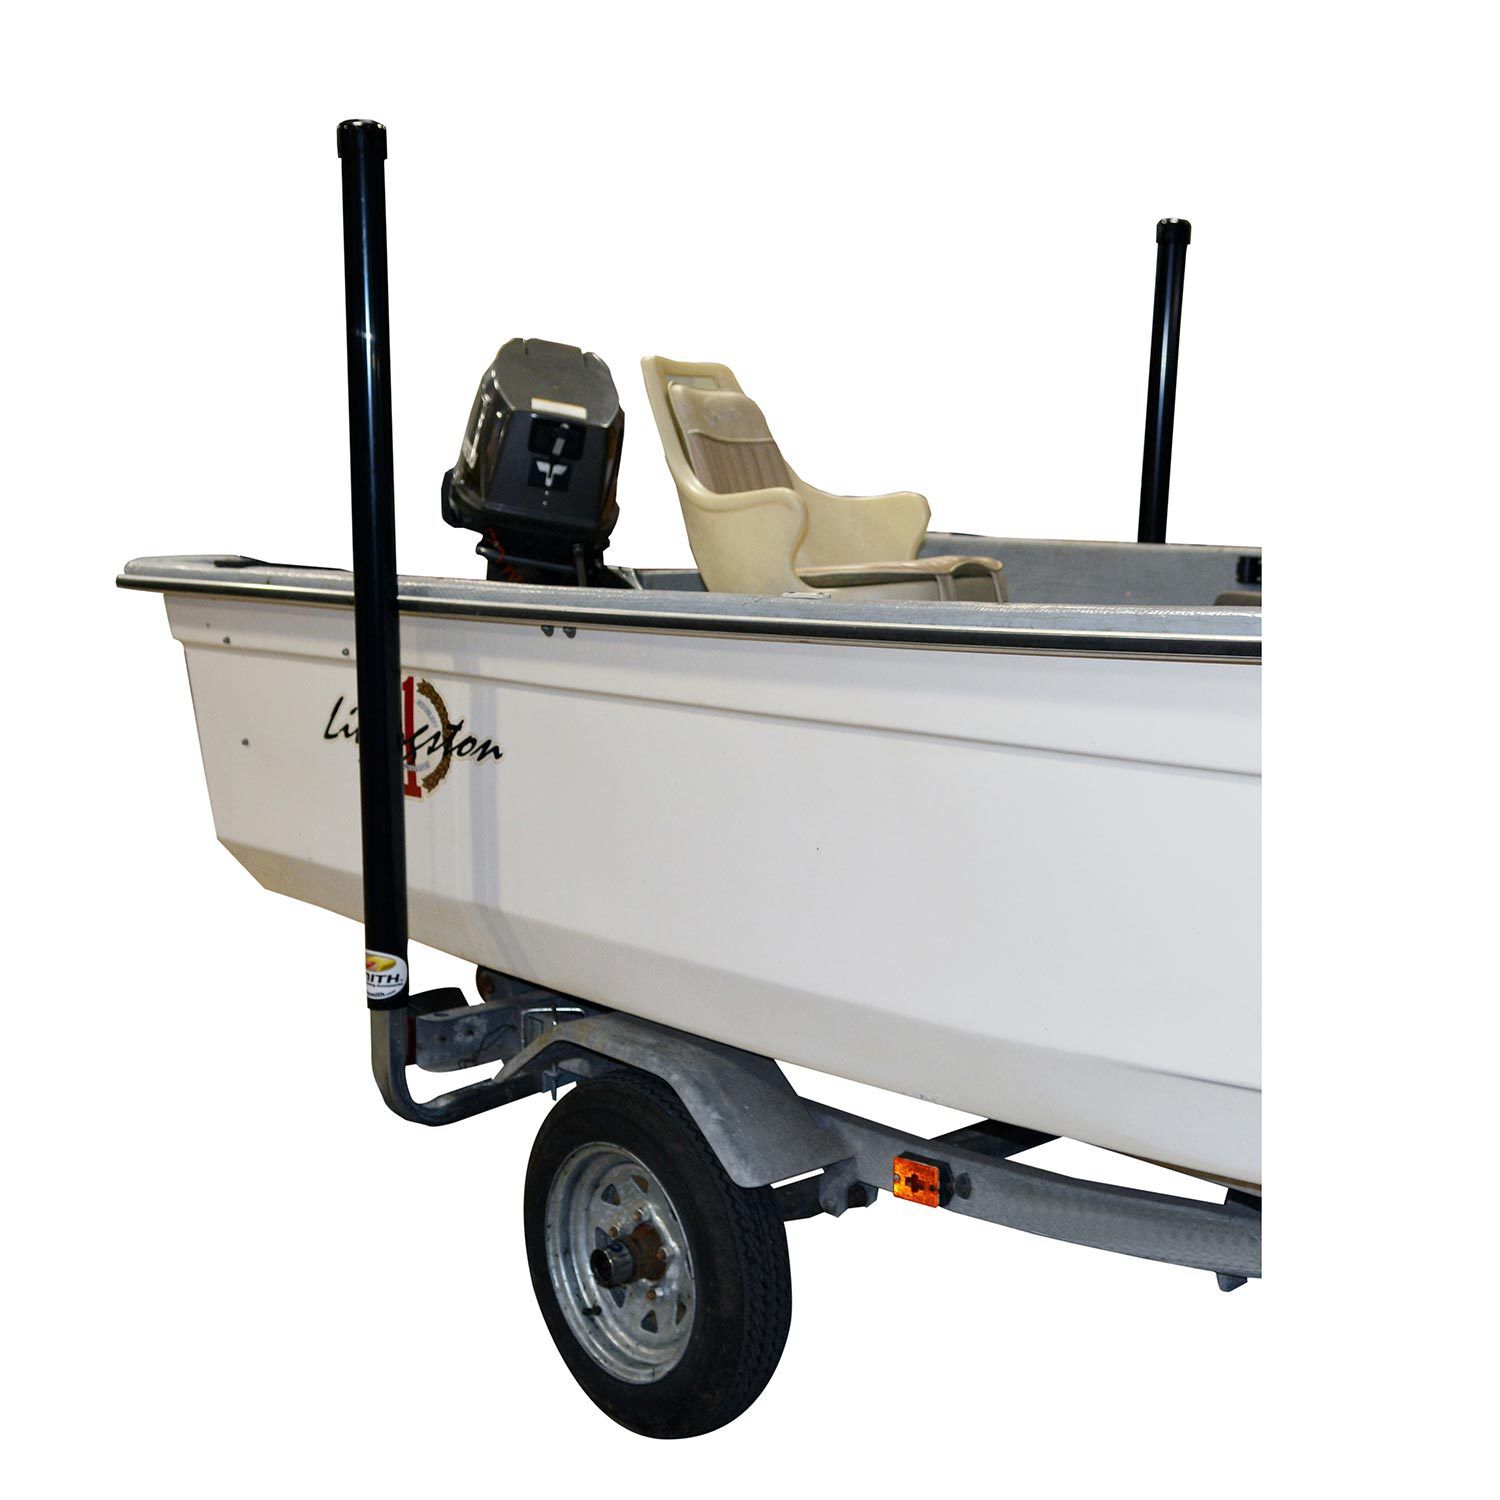 CE SMITH 60" POST BOAT GUIDE ON W/ I-BEAM MOUNT 